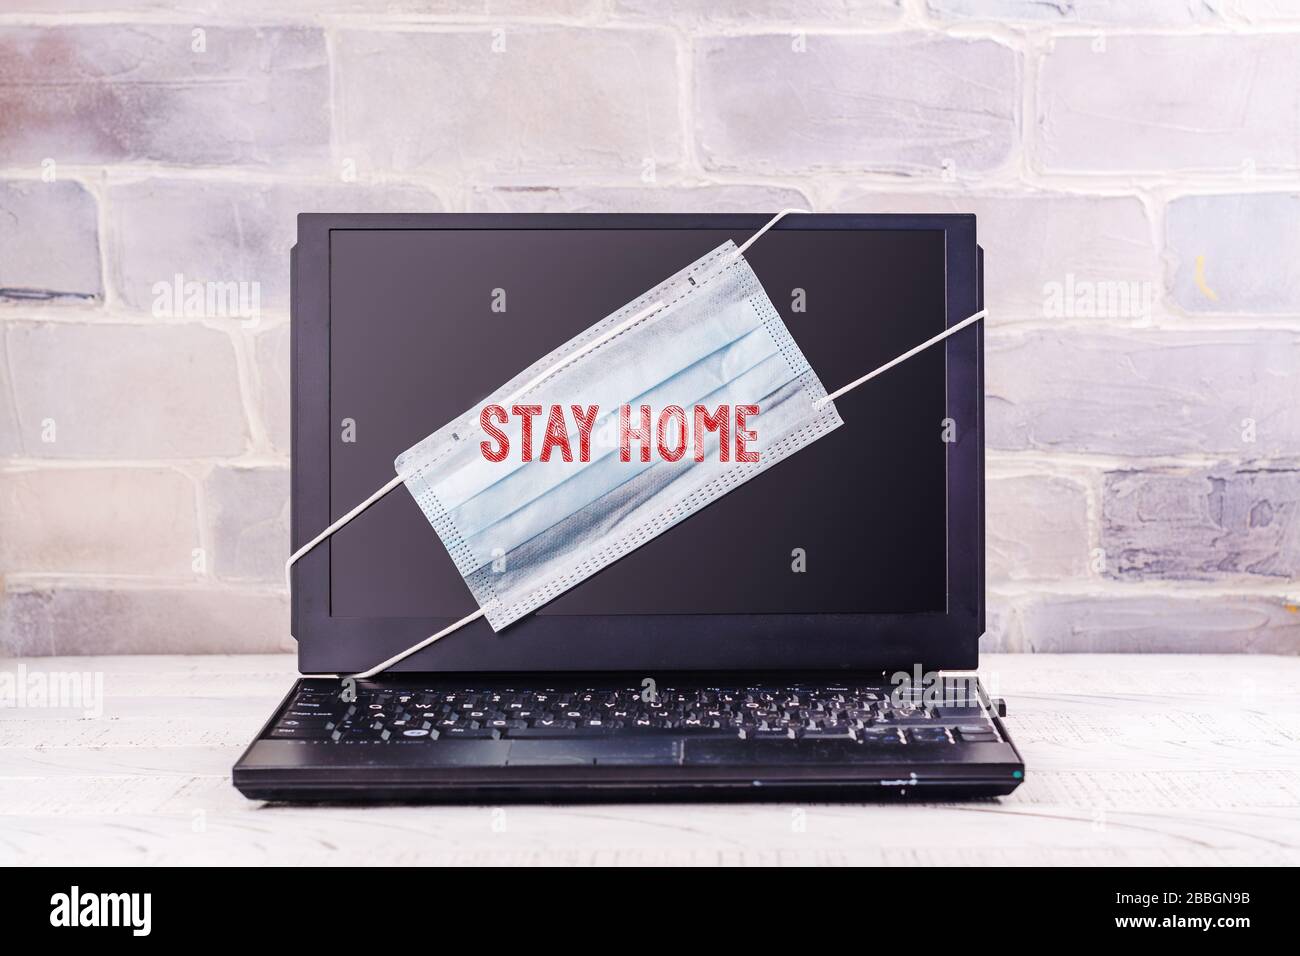 Stay at home background Stock Photo